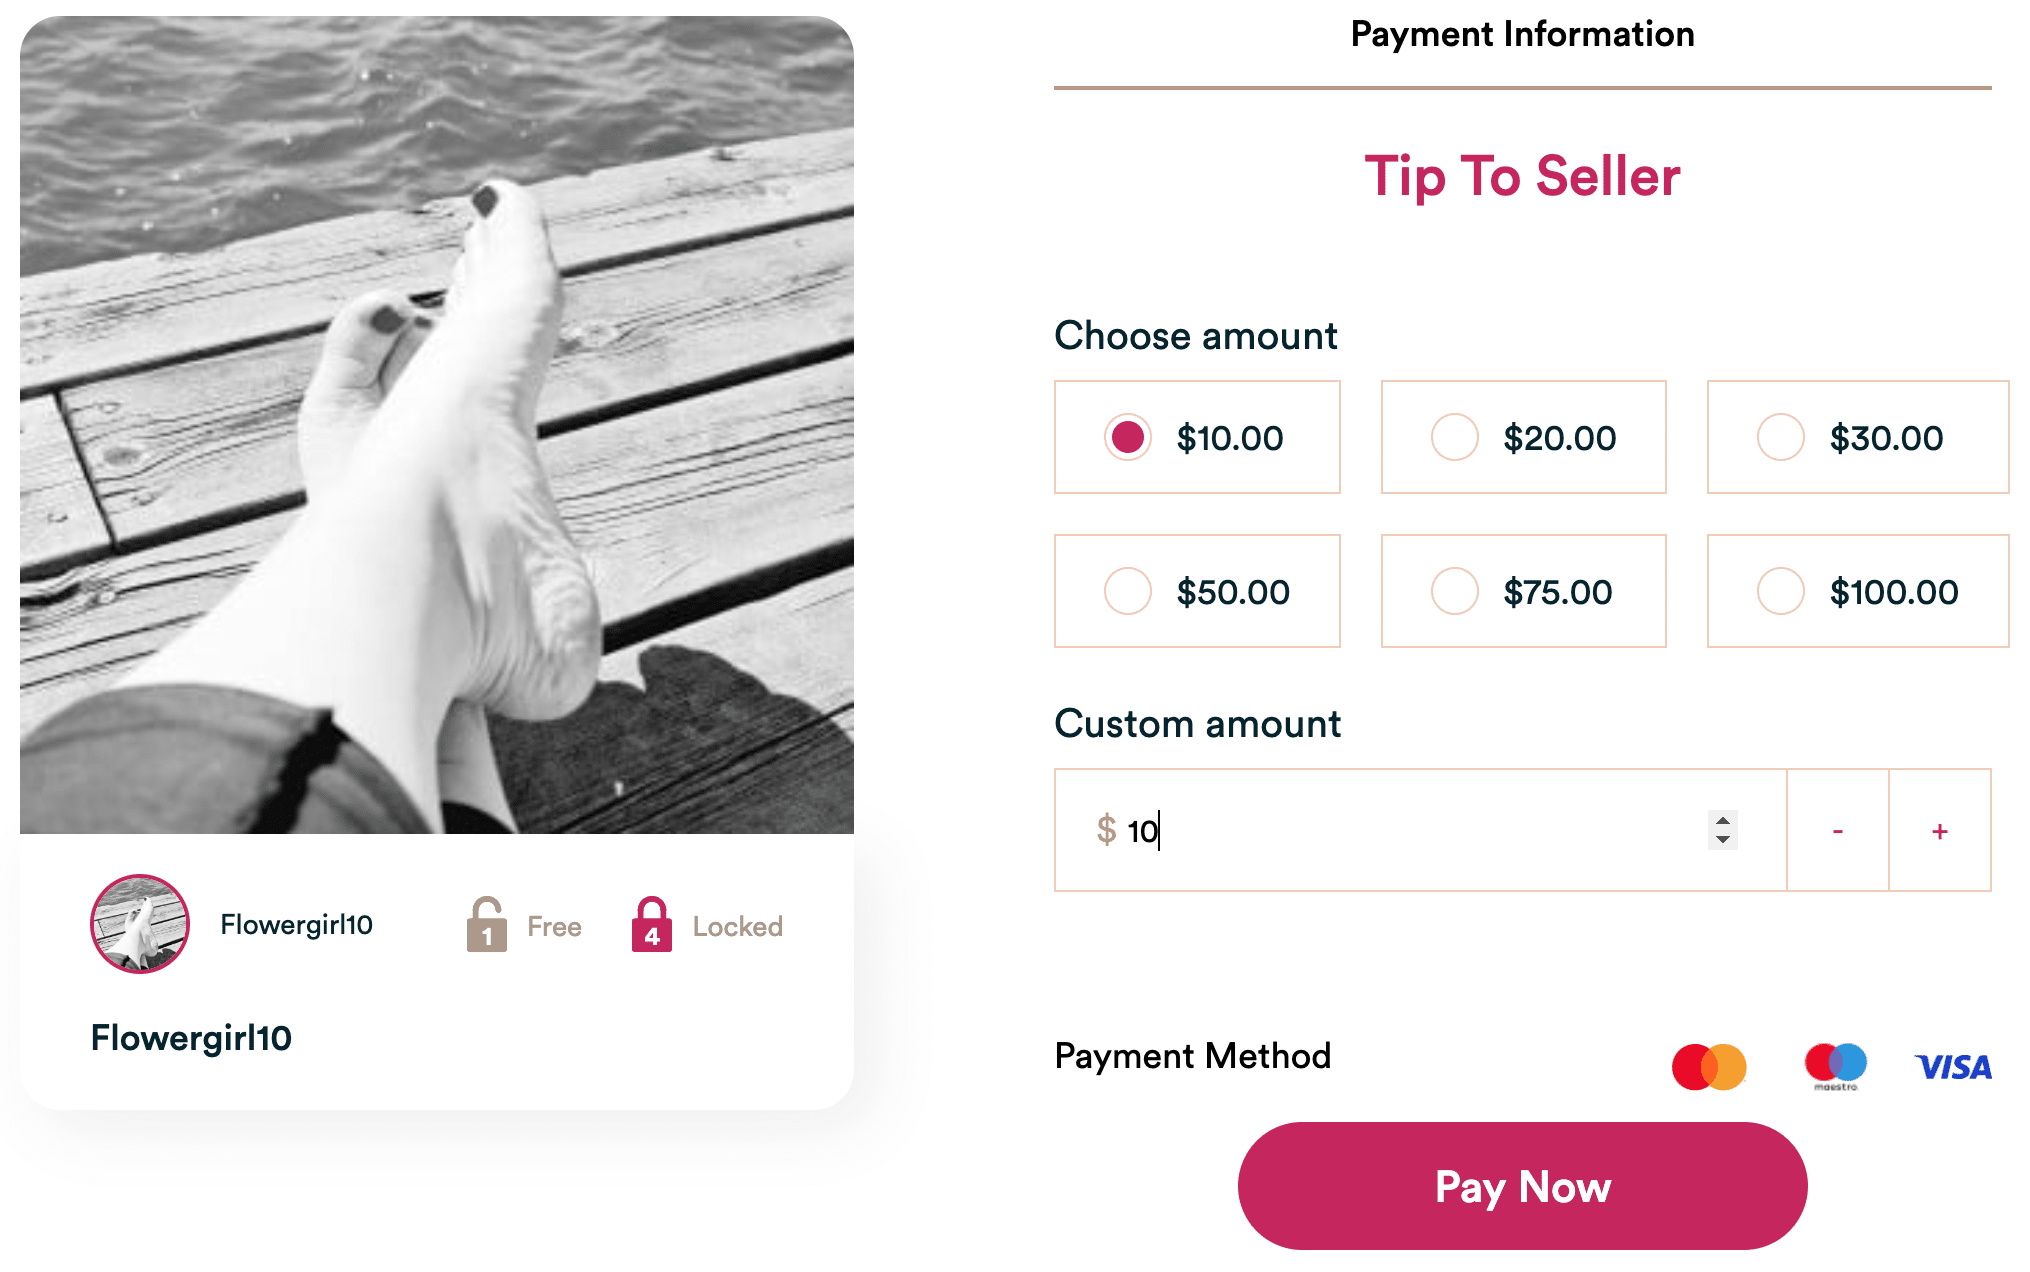 FunWithFeet allows you to send tips as low as $10